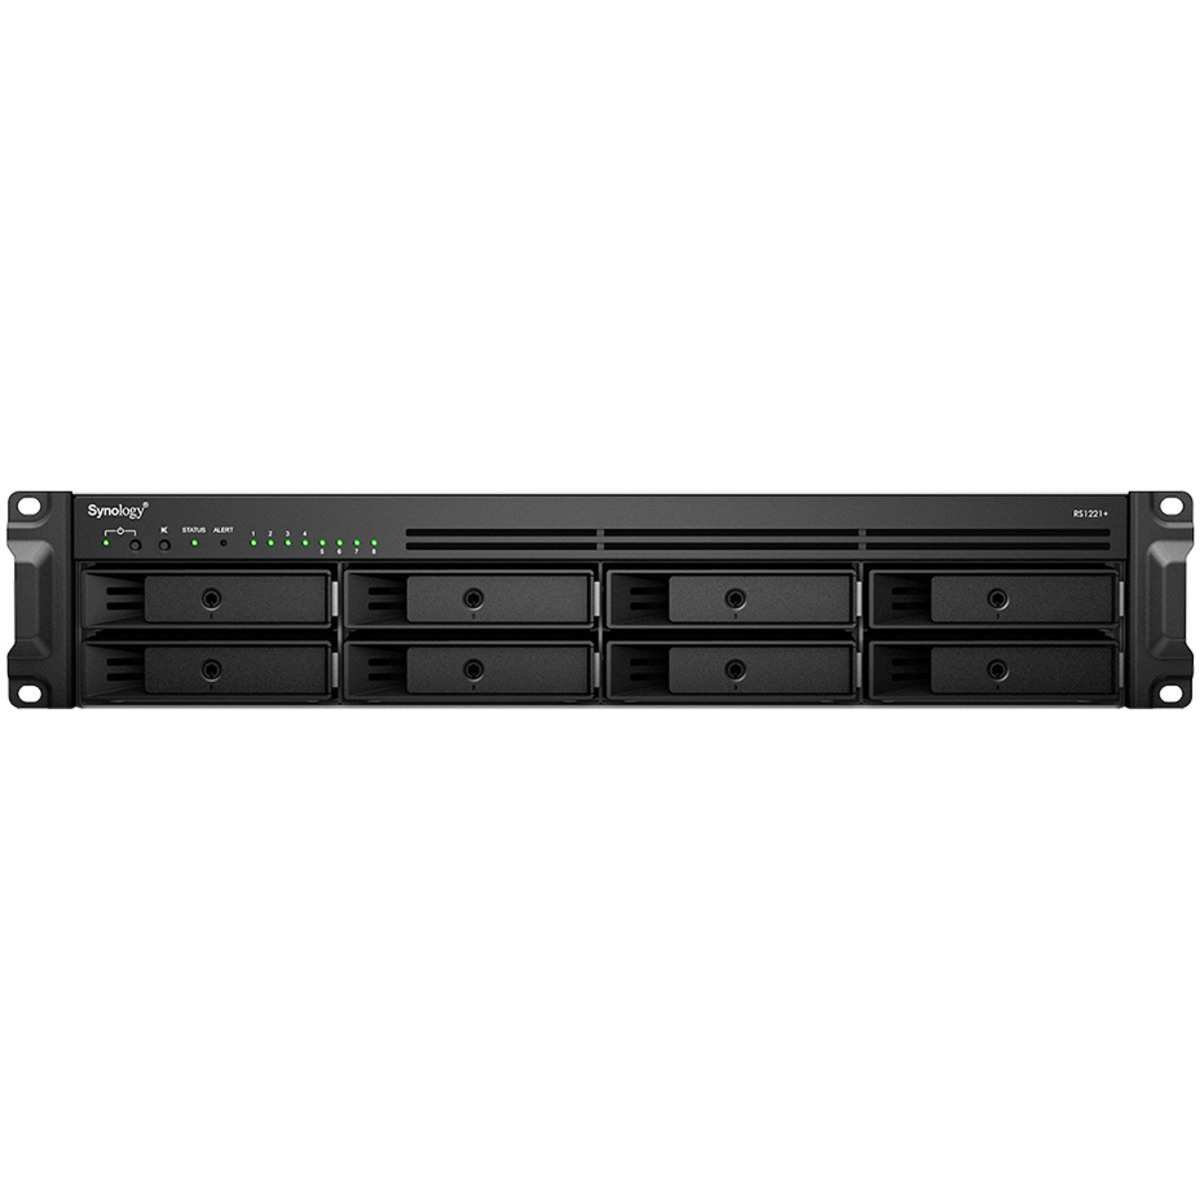 buy $2082 Synology RackStation RS1221+ 16tb RackMount NAS - Network Attached Storage Device 8x2000gb Seagate BarraCuda ST2000DM008 3.5 7200rpm SATA 6Gb/s HDD CONSUMER Class Drives Installed - Burn-In Tested - ON SALE - nas headquarters buy network attached storage server device das new raid-5 free shipping usa christmas new year holiday sale RackStation RS1221+